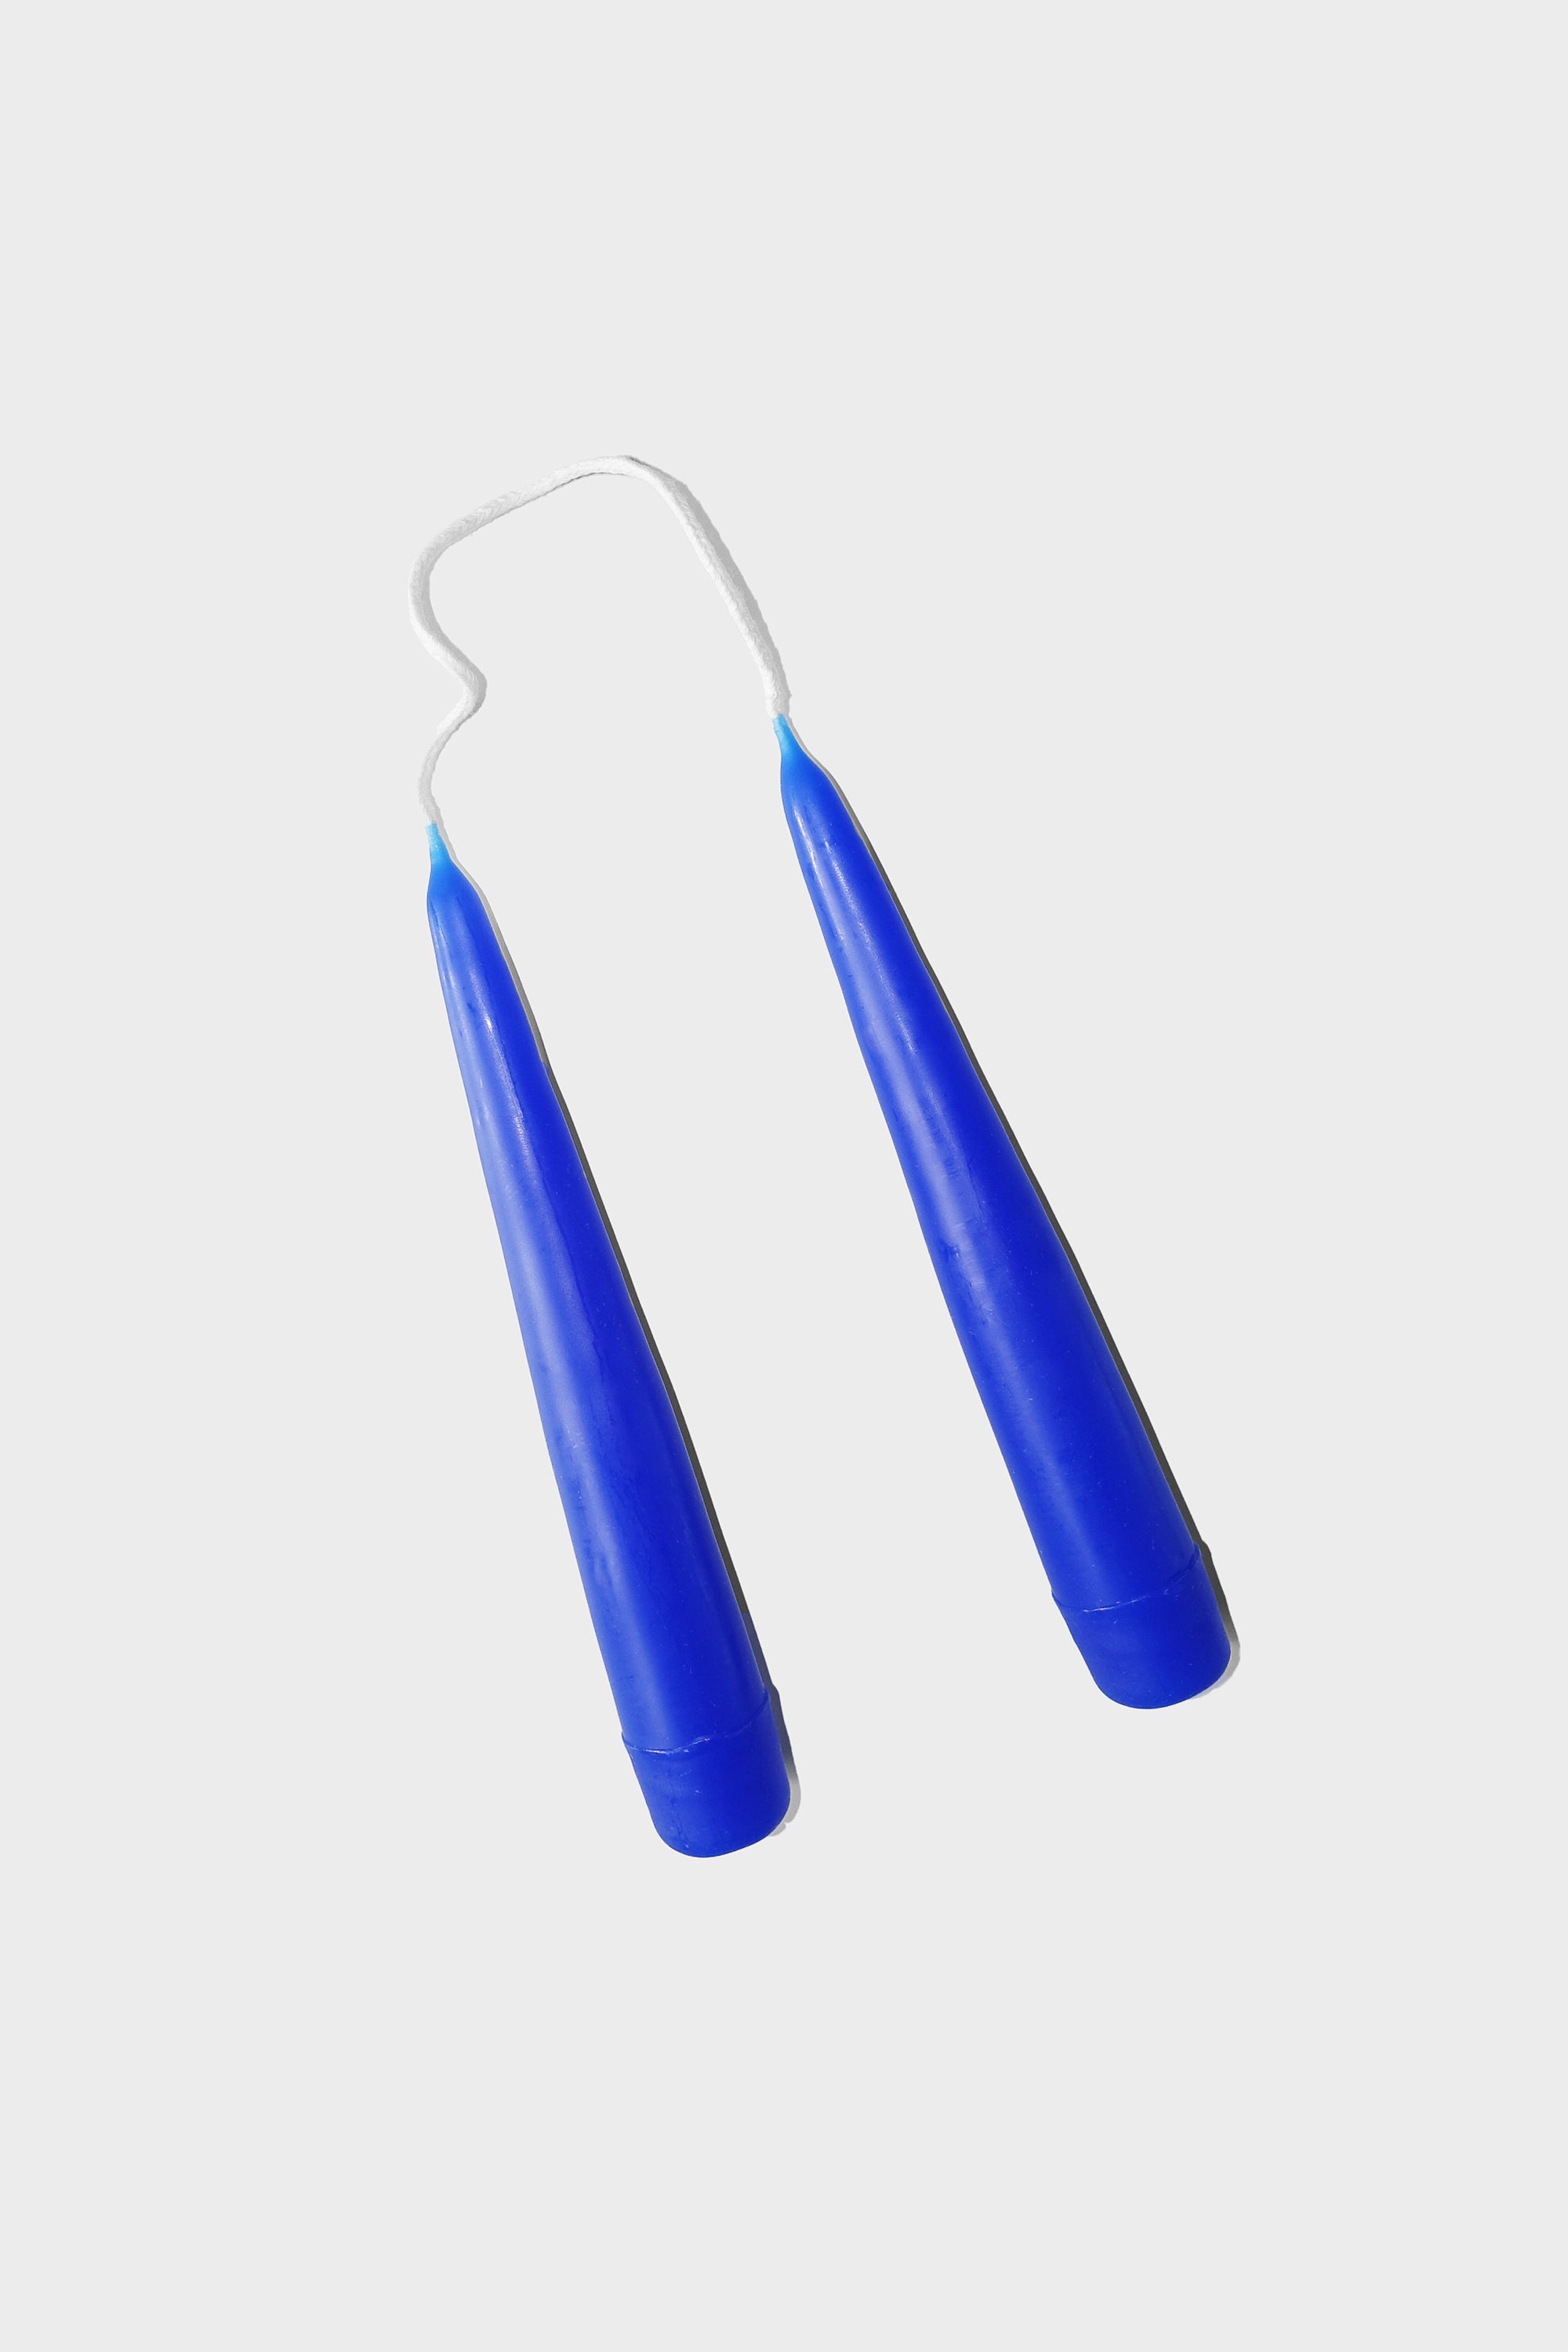 06" Taper Candles in Cobalt